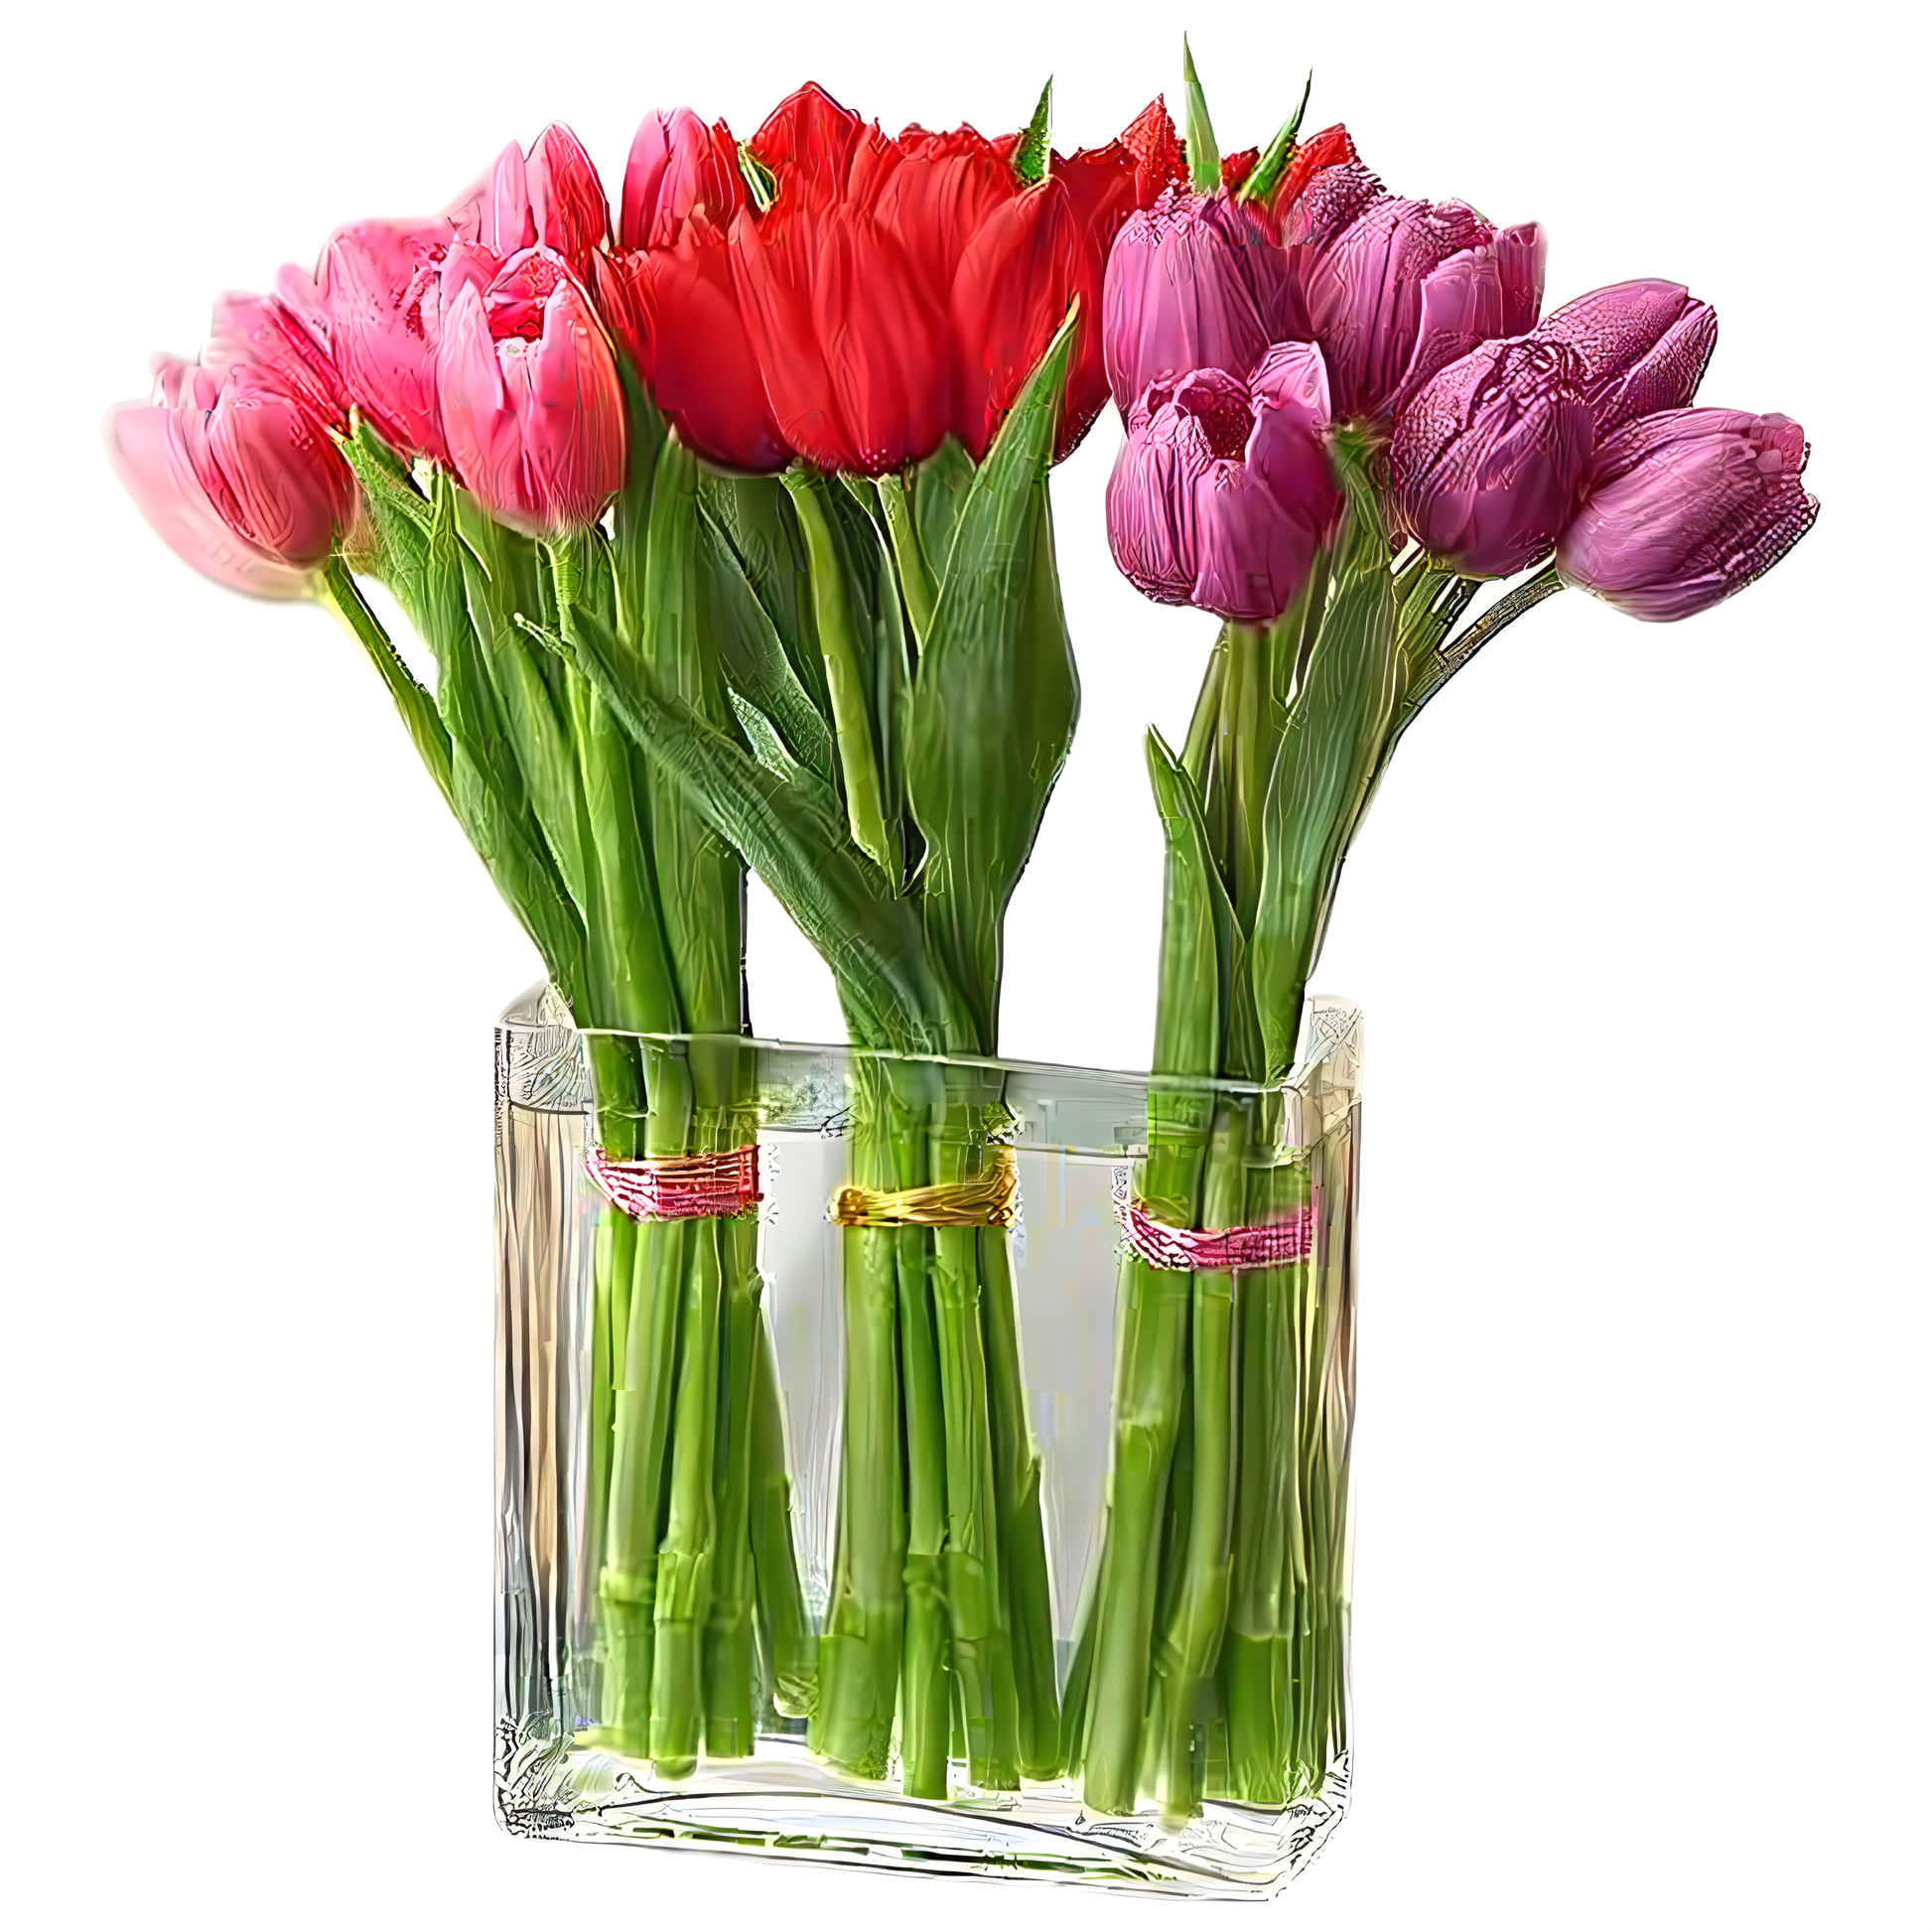 Modern Tulips for Your Valentine - Occasions > Love & Romance